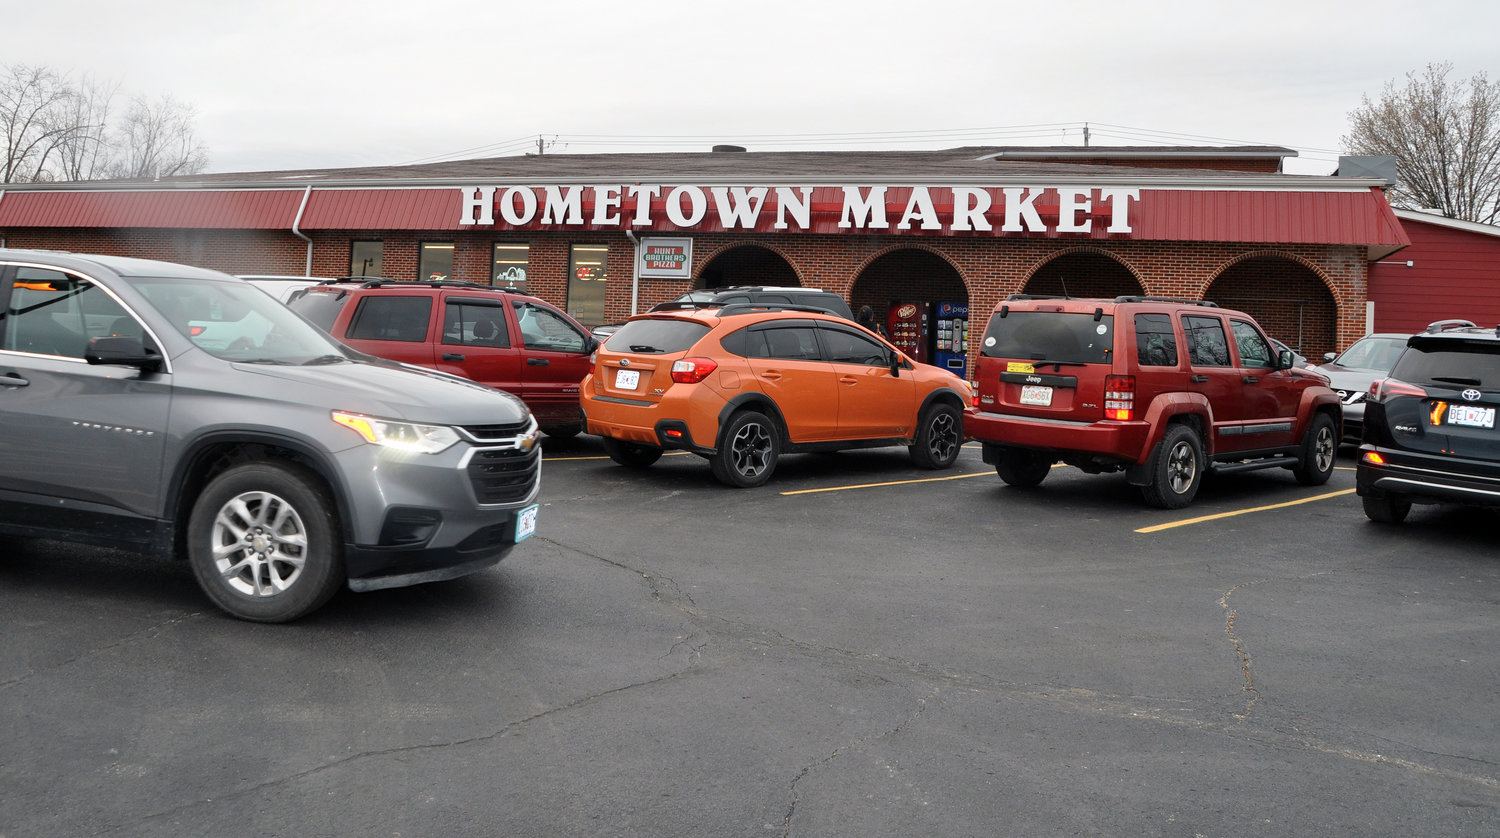 The parking lot was just as crowded as the store as vehicles cruised the lot waiting for an open spot.